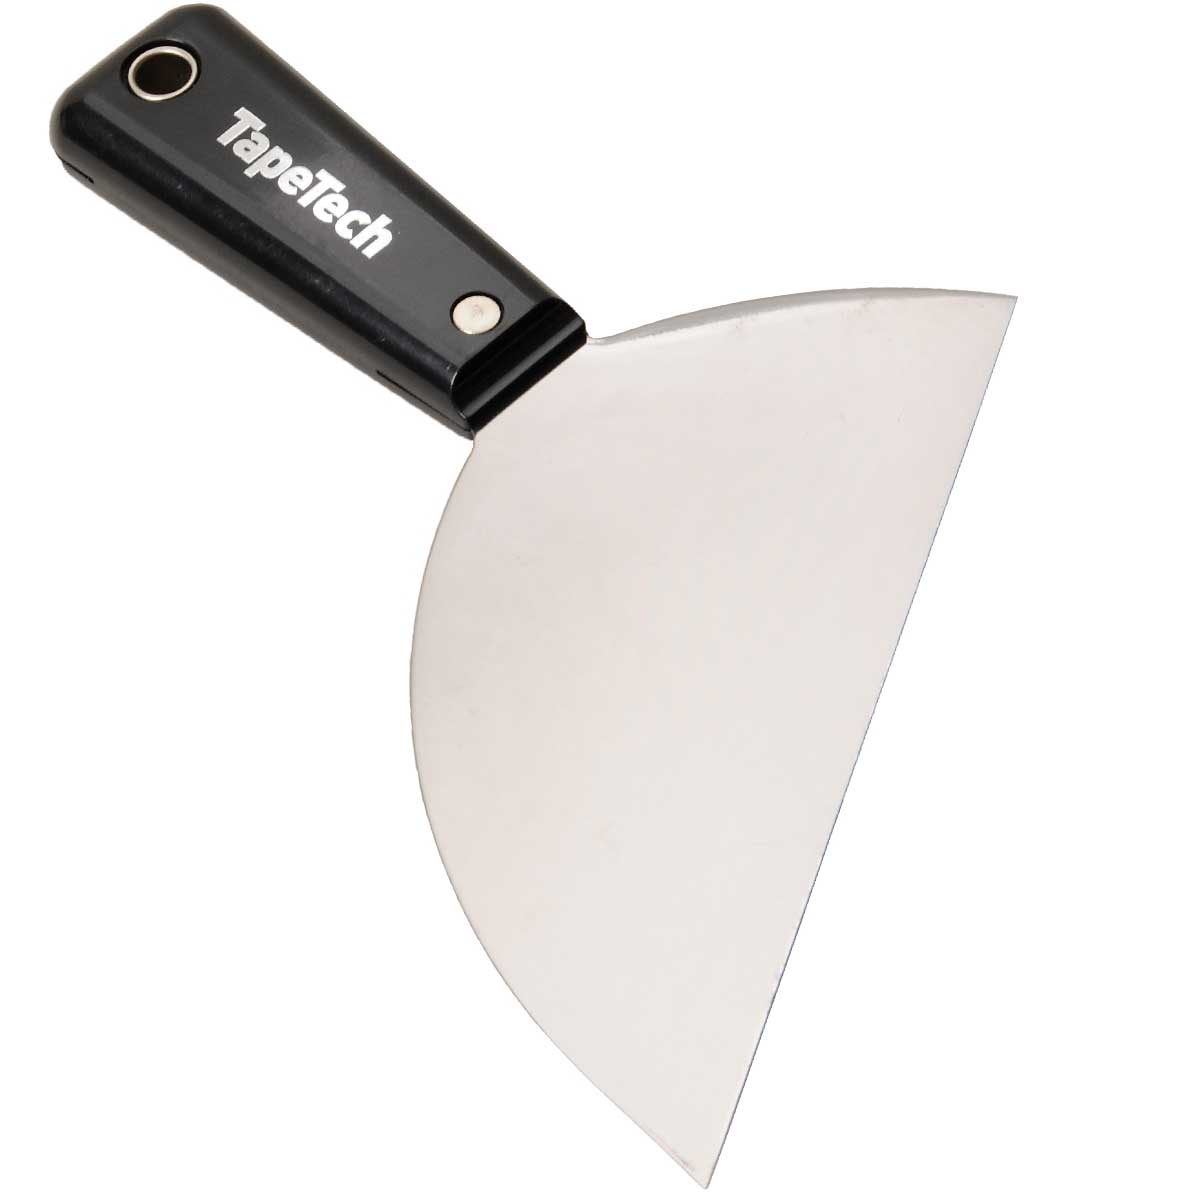 TapeTech 6" Clipped Joint Knife